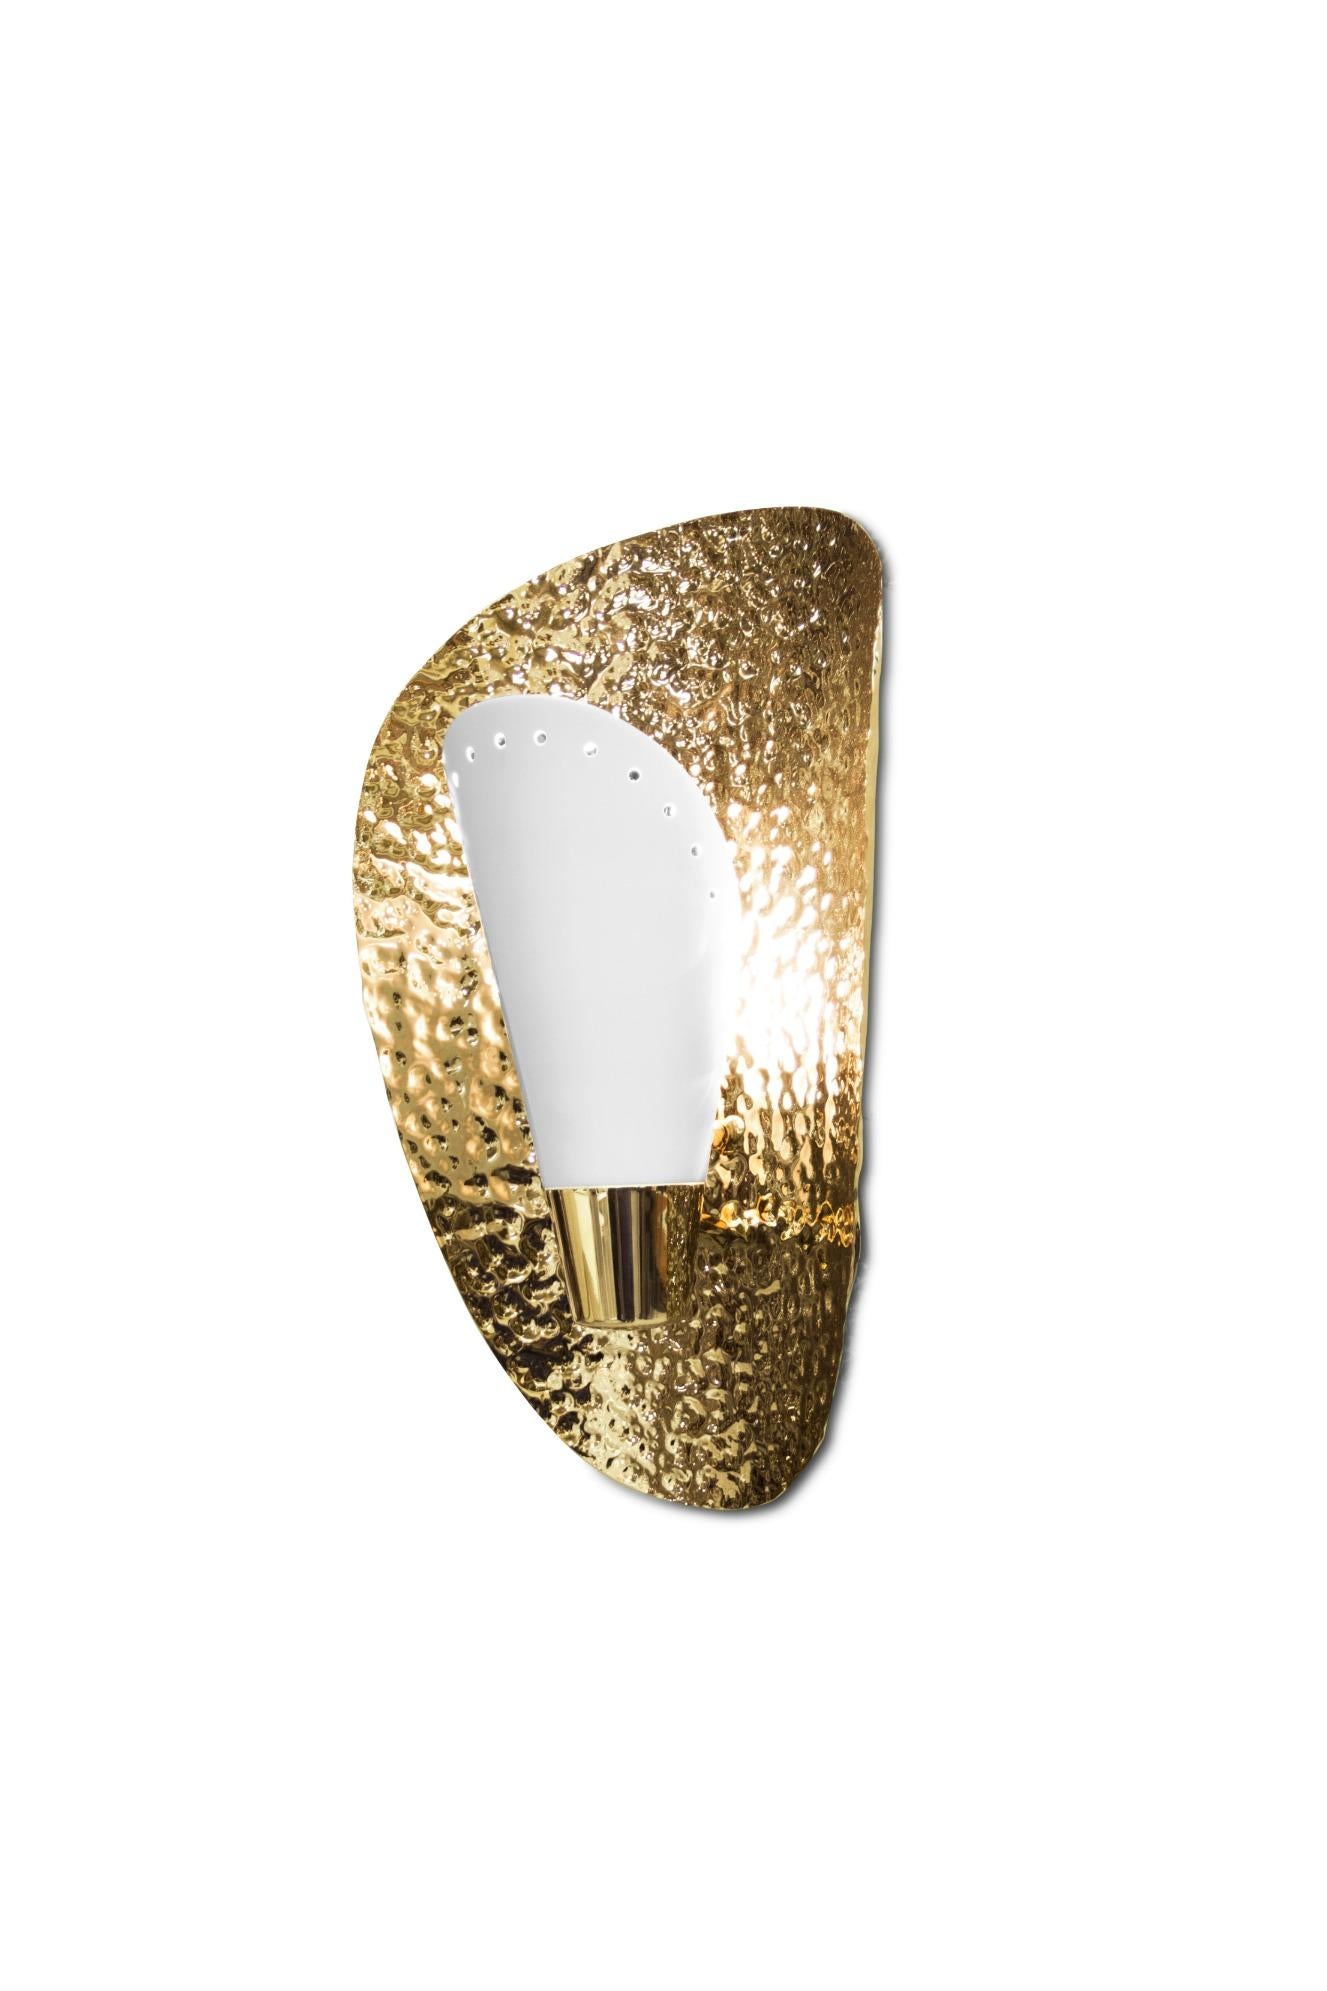 Aruna Sconce with Black Shade in Hammered Gold Plated Brass Shell For Sale 2